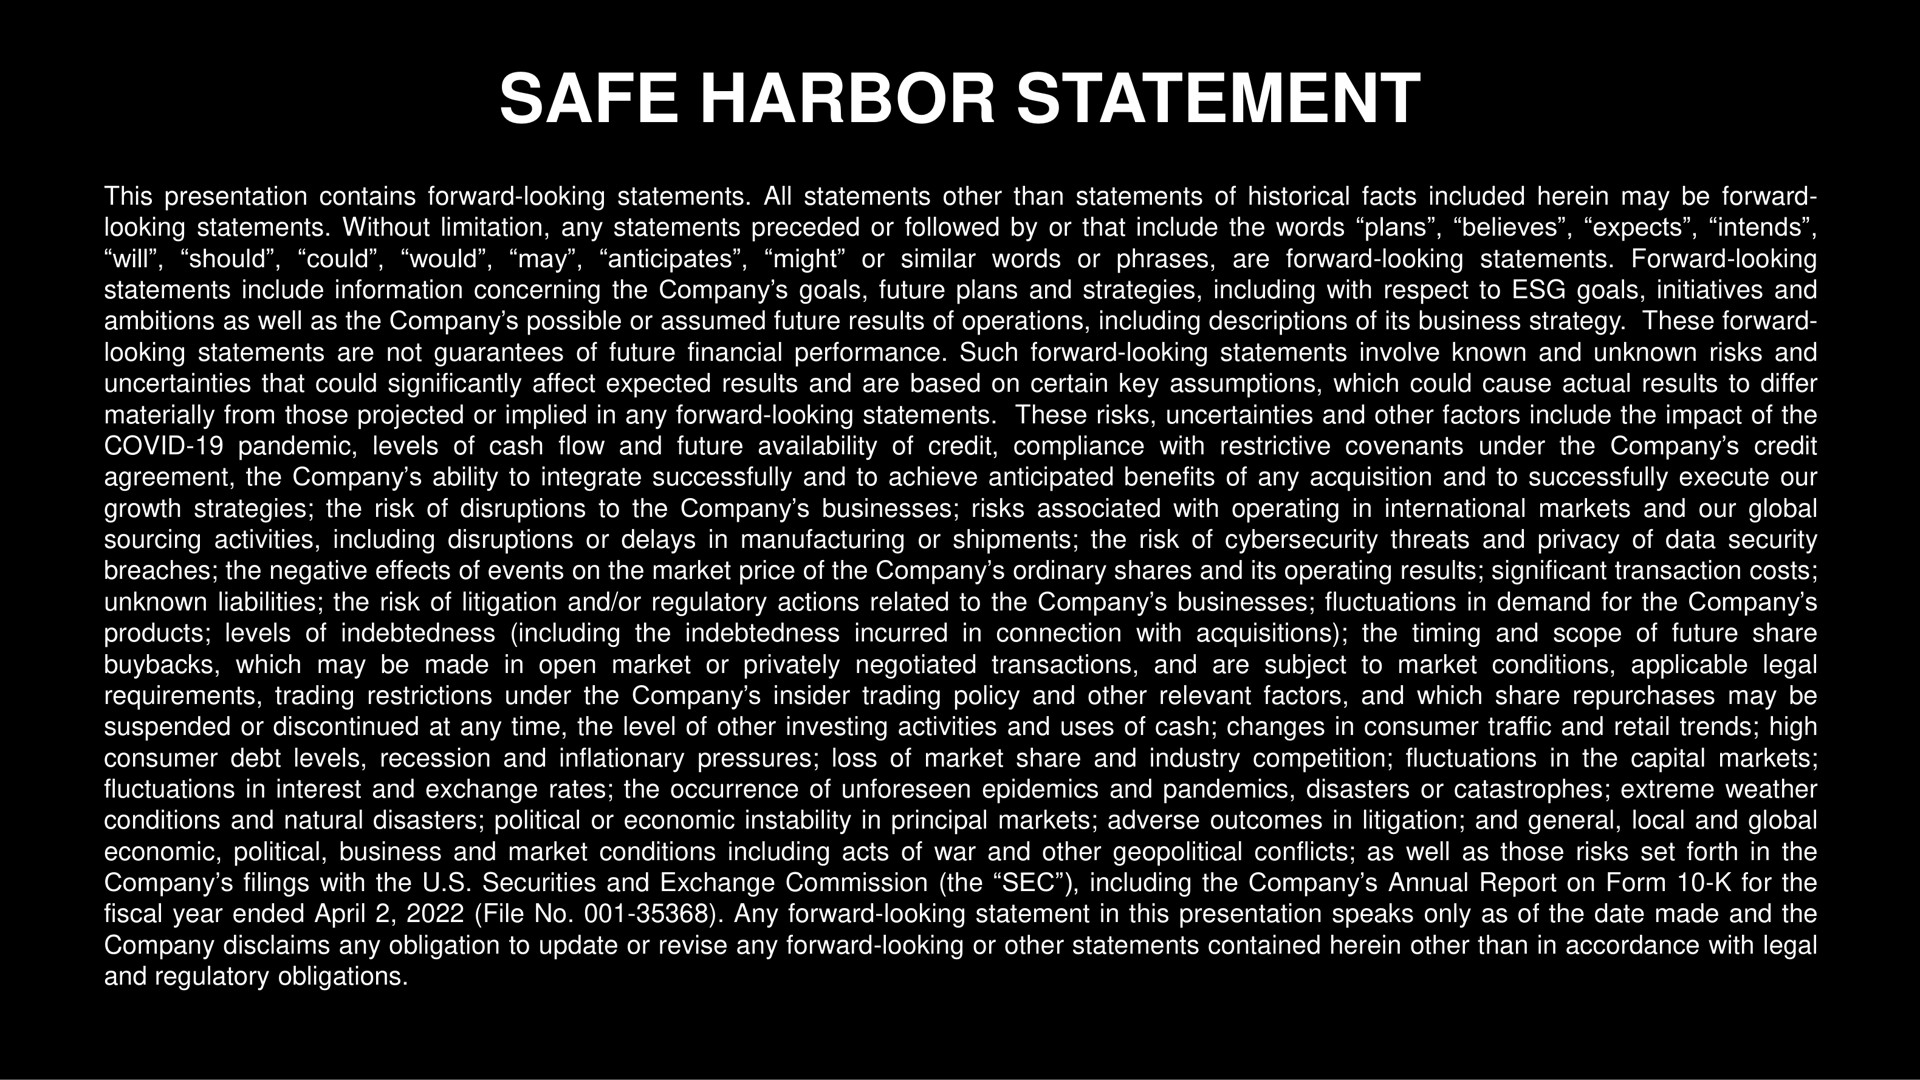 safe harbor statement this presentation contains forward looking statements all statements other than statements of historical facts included herein may be forward looking statements without limitation any statements preceded or followed by or that include the words plans believes expects intends will should could would may anticipates might or similar words or phrases are forward looking statements forward looking statements include information concerning the company goals future plans and strategies including with respect to goals initiatives and ambitions as well as the company possible or assumed future results of operations including descriptions of its business strategy these forward looking statements are not guarantees of future financial performance such forward looking statements involve known and unknown risks and uncertainties that could significantly affect expected results and are based on certain key assumptions which could cause actual results to differ materially from those projected or implied in any forward looking statements these risks uncertainties and other factors include the impact of the covid pandemic levels of cash flow and future availability of credit compliance with restrictive covenants under the company credit agreement the company ability to integrate successfully and to achieve anticipated benefits of any acquisition and to successfully execute our growth strategies the risk of disruptions to the company businesses risks associated with operating in international markets and our global sourcing activities including disruptions or delays in manufacturing or shipments the risk of threats and privacy of data security breaches the negative effects of events on the market price of the company ordinary shares and its operating results significant transaction costs unknown liabilities the risk of litigation and or regulatory actions related to the company businesses fluctuations in demand for the company products levels of indebtedness including the indebtedness incurred in connection with acquisitions the timing and scope of future share which may be made in open market or privately negotiated transactions and are subject to market conditions applicable legal requirements trading restrictions under the company insider trading policy and other relevant factors and which share repurchases may be suspended or discontinued at any time the level of other investing activities and uses of cash changes in consumer traffic and retail trends high consumer debt levels recession and inflationary pressures loss of market share and industry competition fluctuations in the capital markets fluctuations in interest and exchange rates the occurrence of unforeseen epidemics and pandemics disasters or catastrophes extreme weather conditions and natural disasters political or economic instability in principal markets adverse outcomes in litigation and general local and global economic political business and market conditions including acts of war and other geopolitical conflicts as well as those risks set forth in the company filings with the securities and exchange commission the sec including the company annual report on form for the fiscal year ended file no any forward looking in this presentation speaks only as of the date made and the company disclaims any obligation to update or revise any forward looking or other statements contained herein other than in accordance with legal and regulatory obligations | Capri Holdings